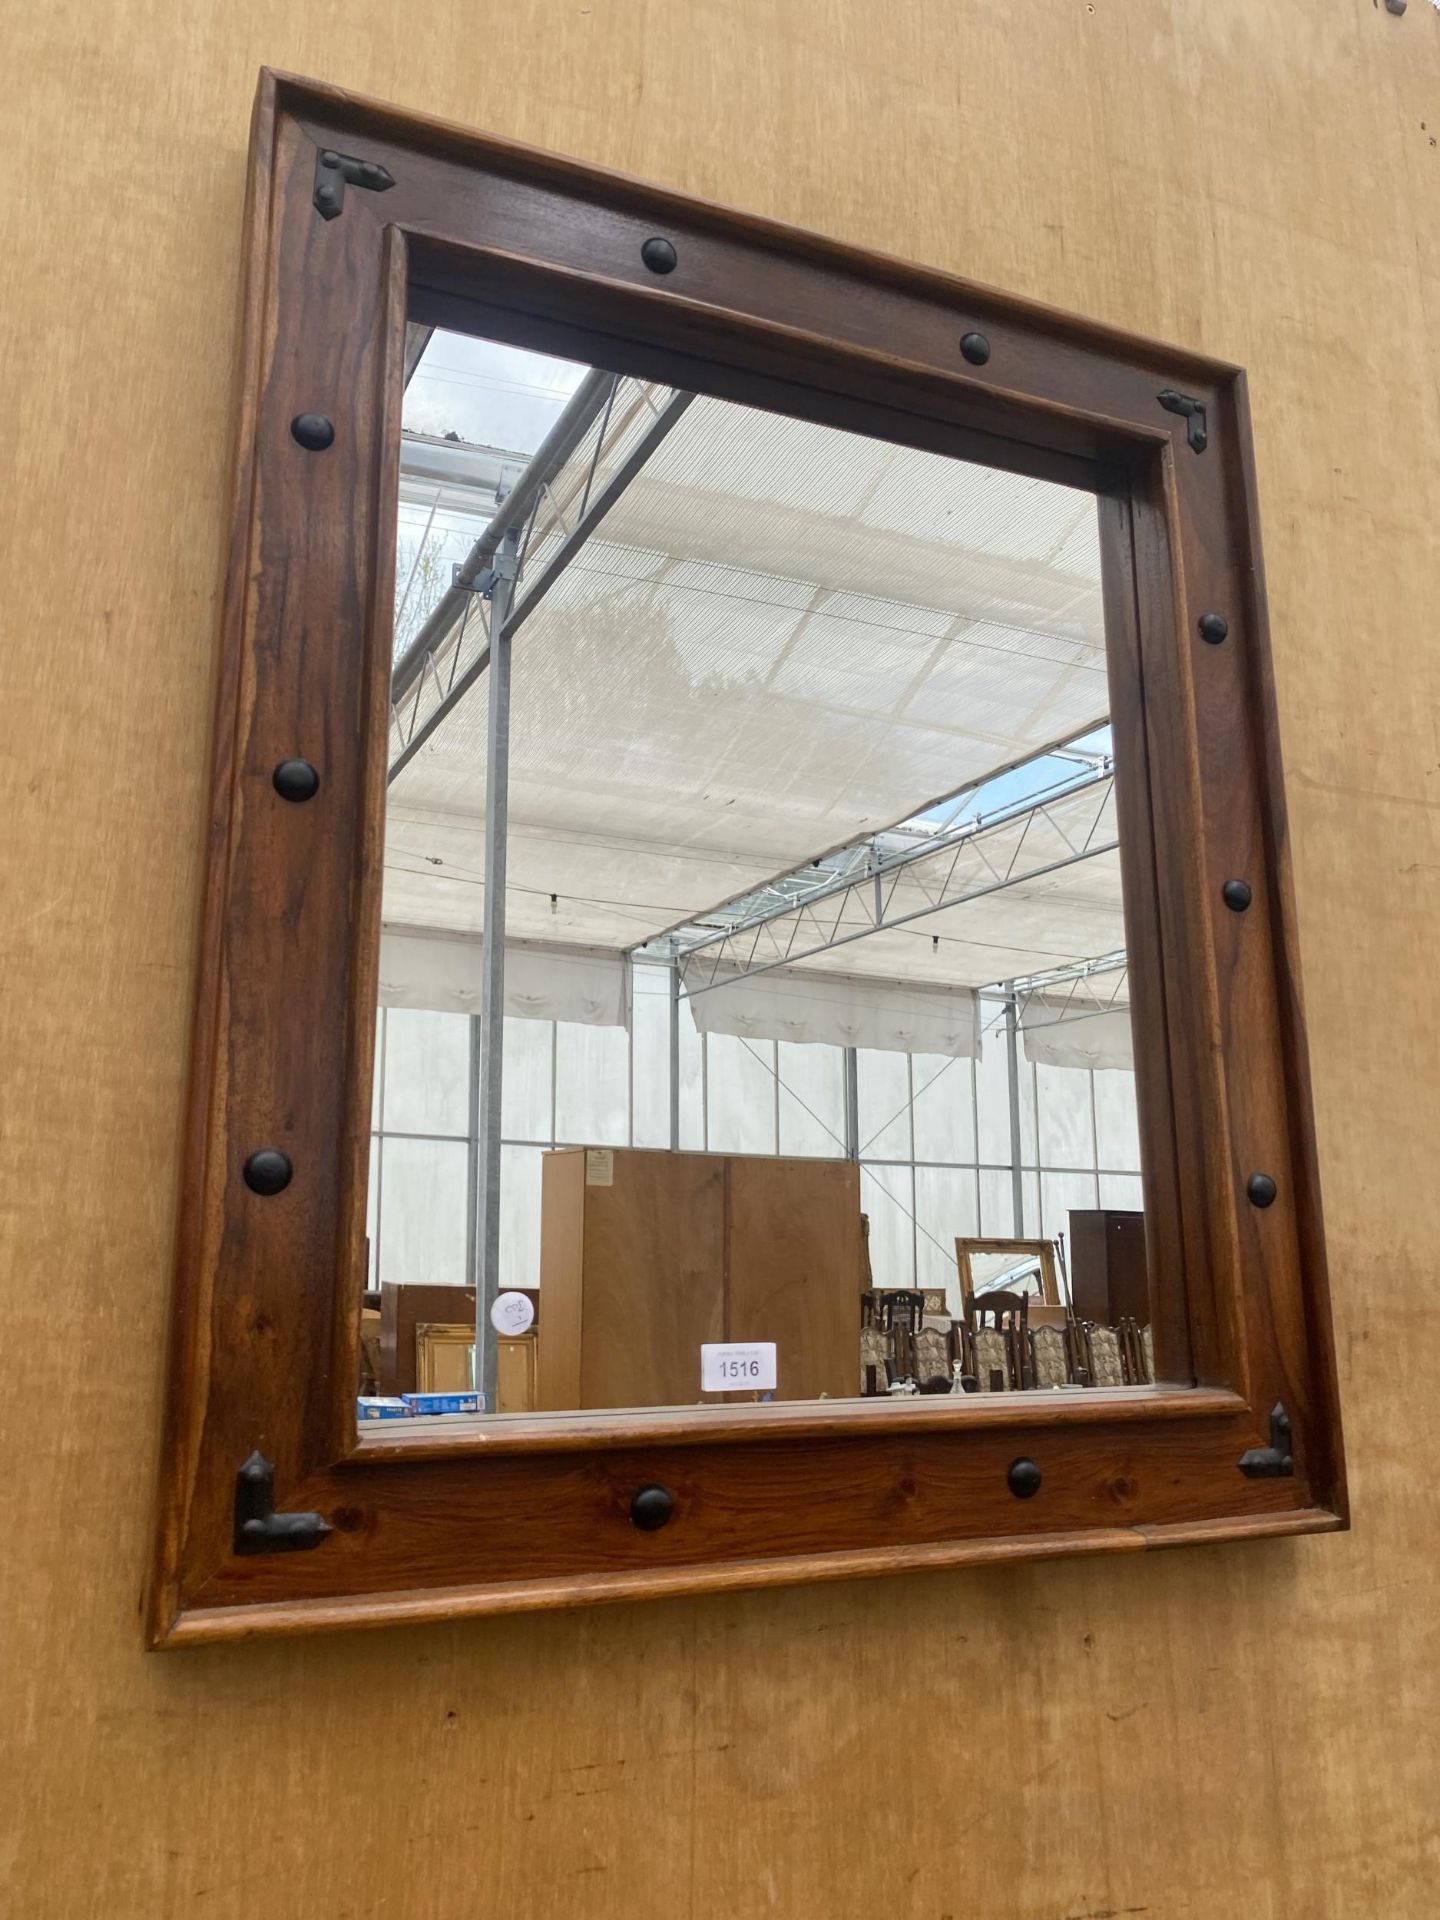 A DECORATIVE WOODEN FRAMED WALL MIRROR